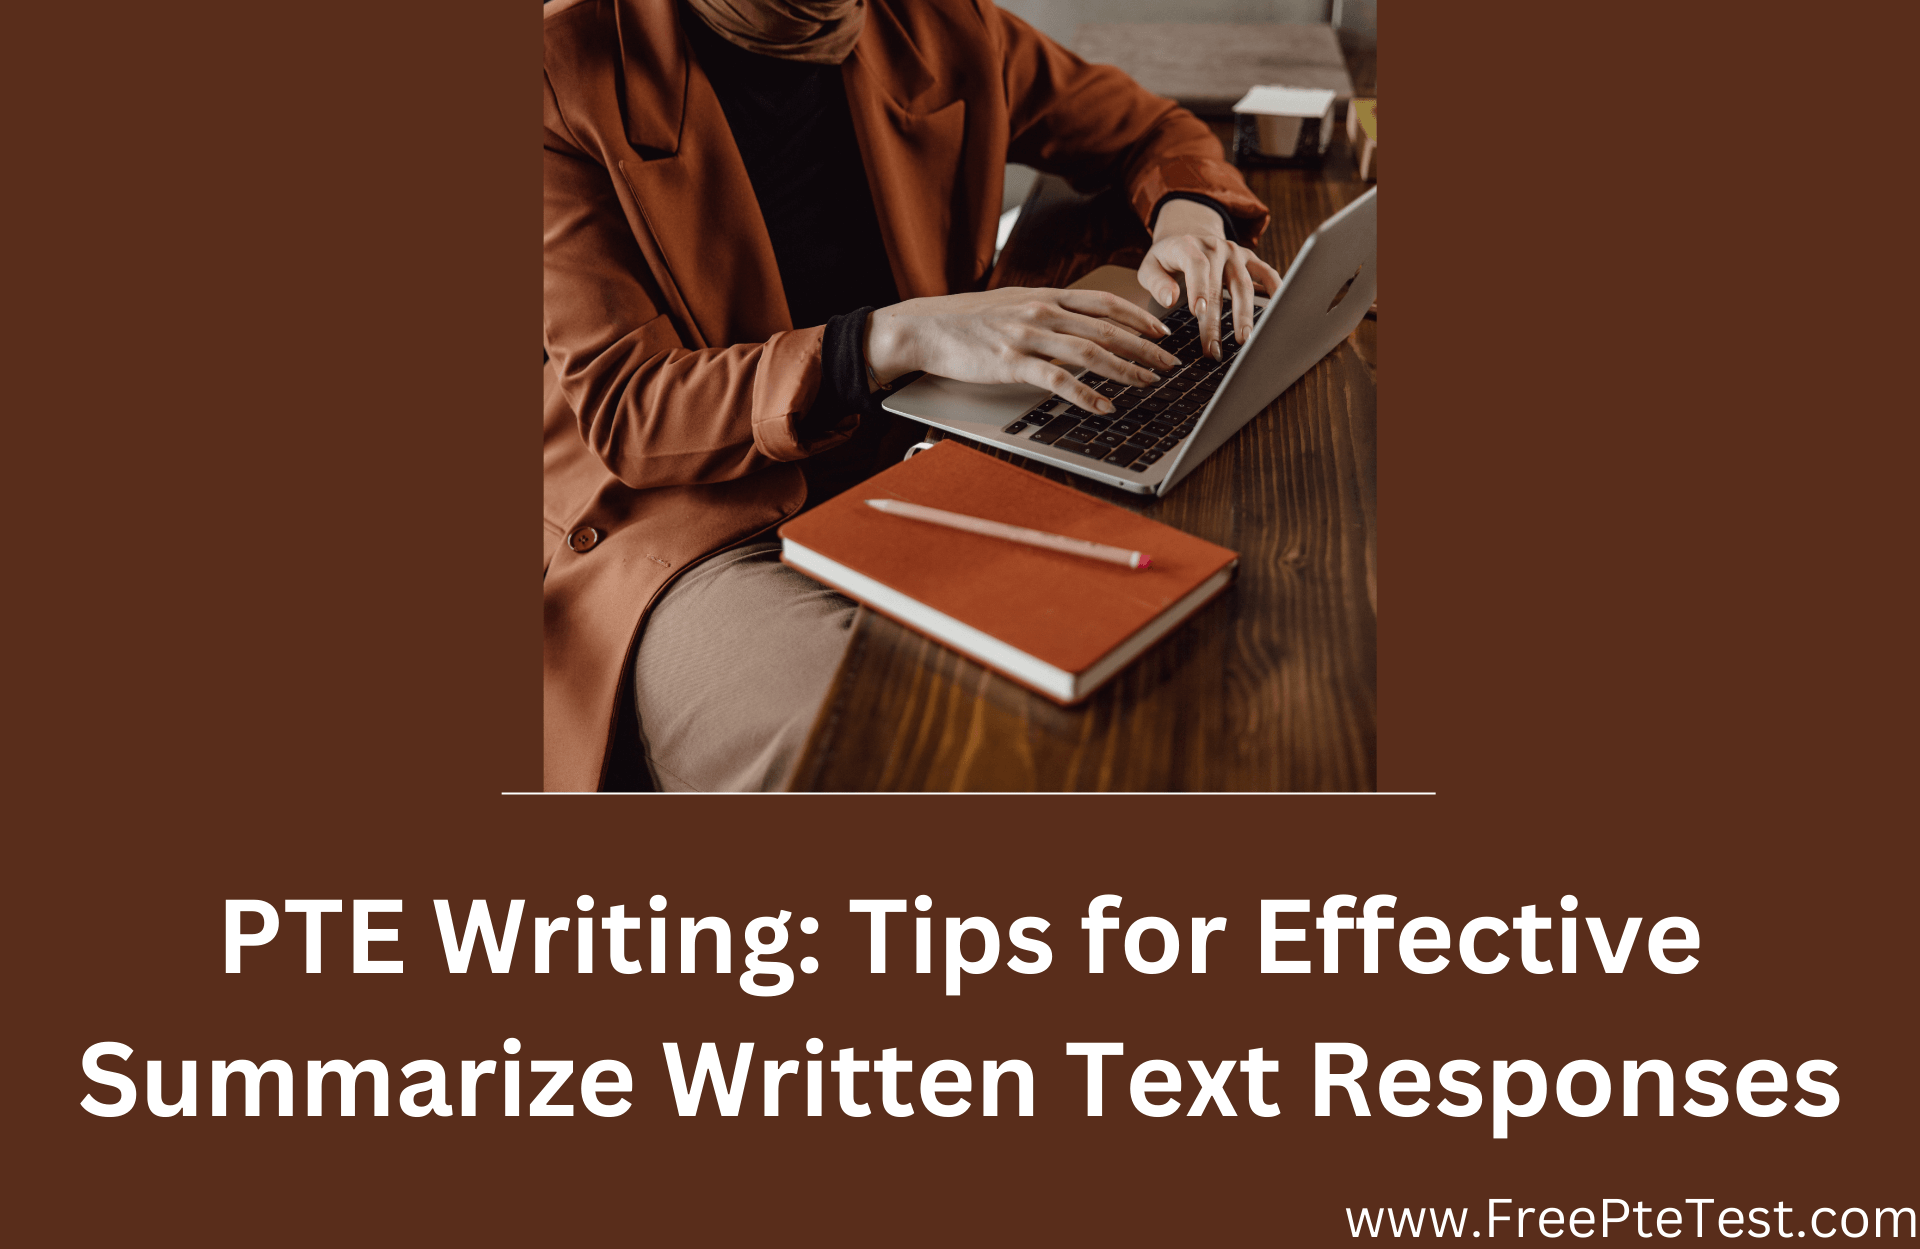 You are currently viewing PTE Writing: Tips for Effective Summarize Written Text Responses